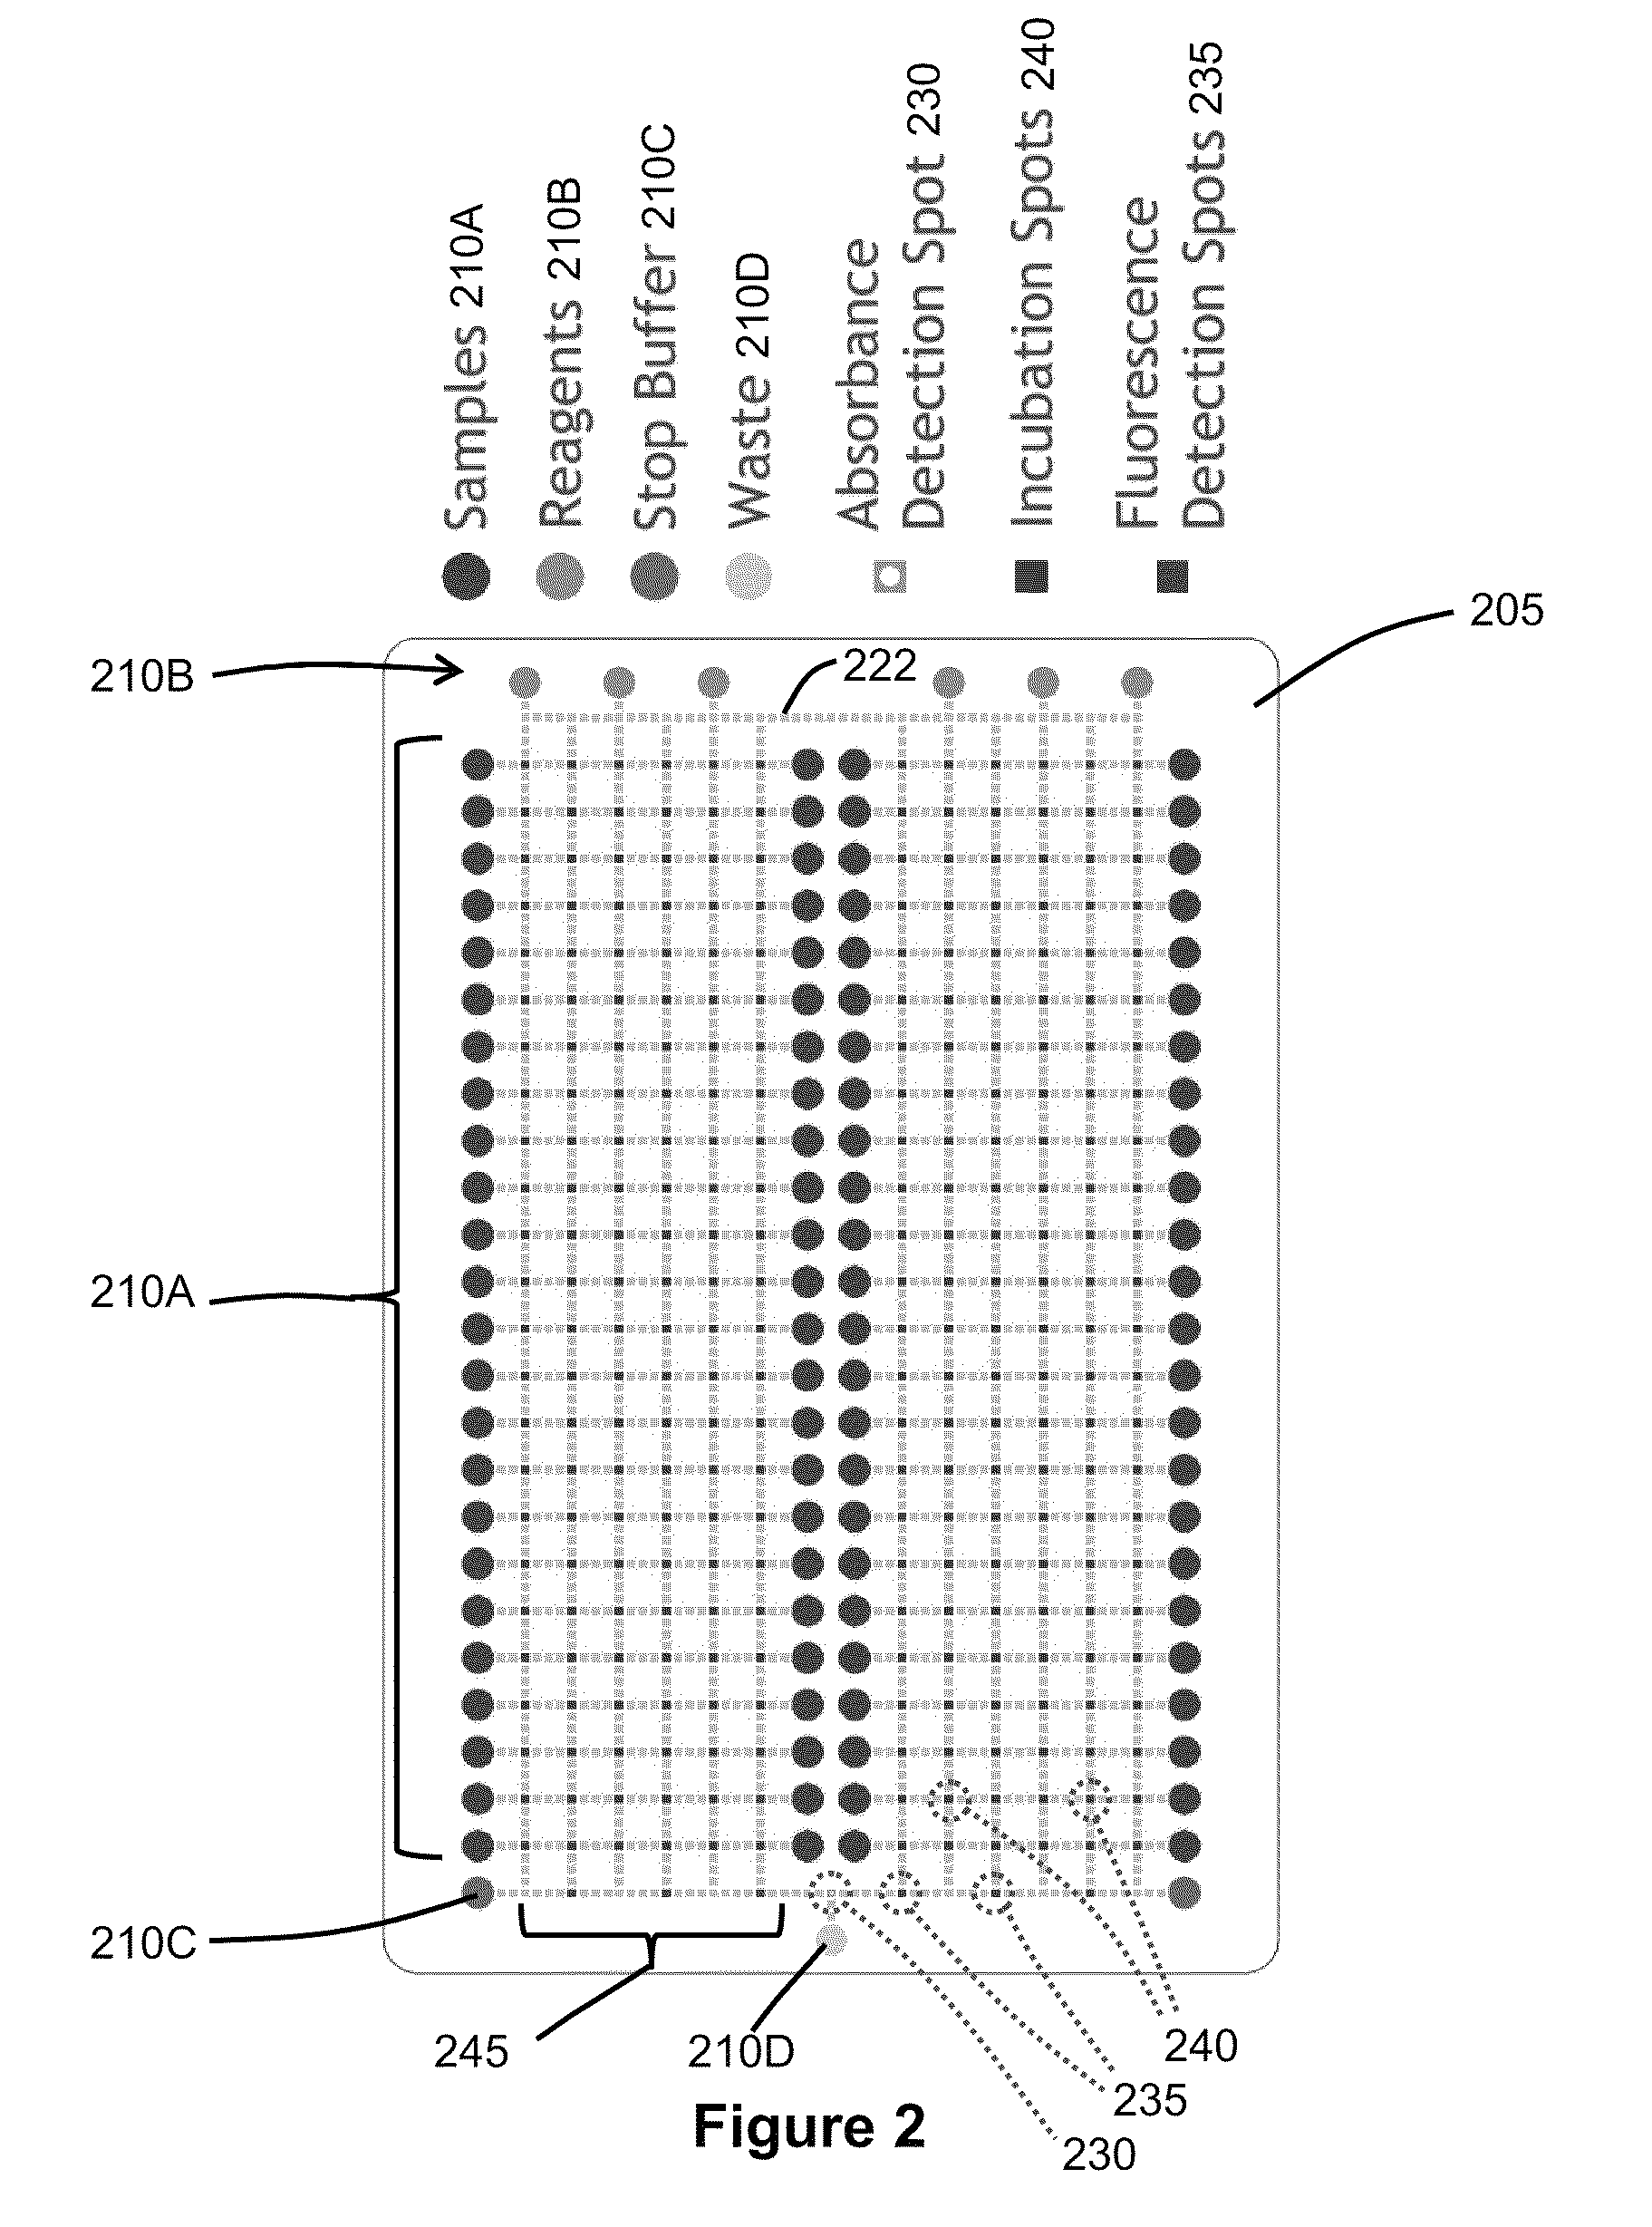 Enzyme assays for a droplet actuator